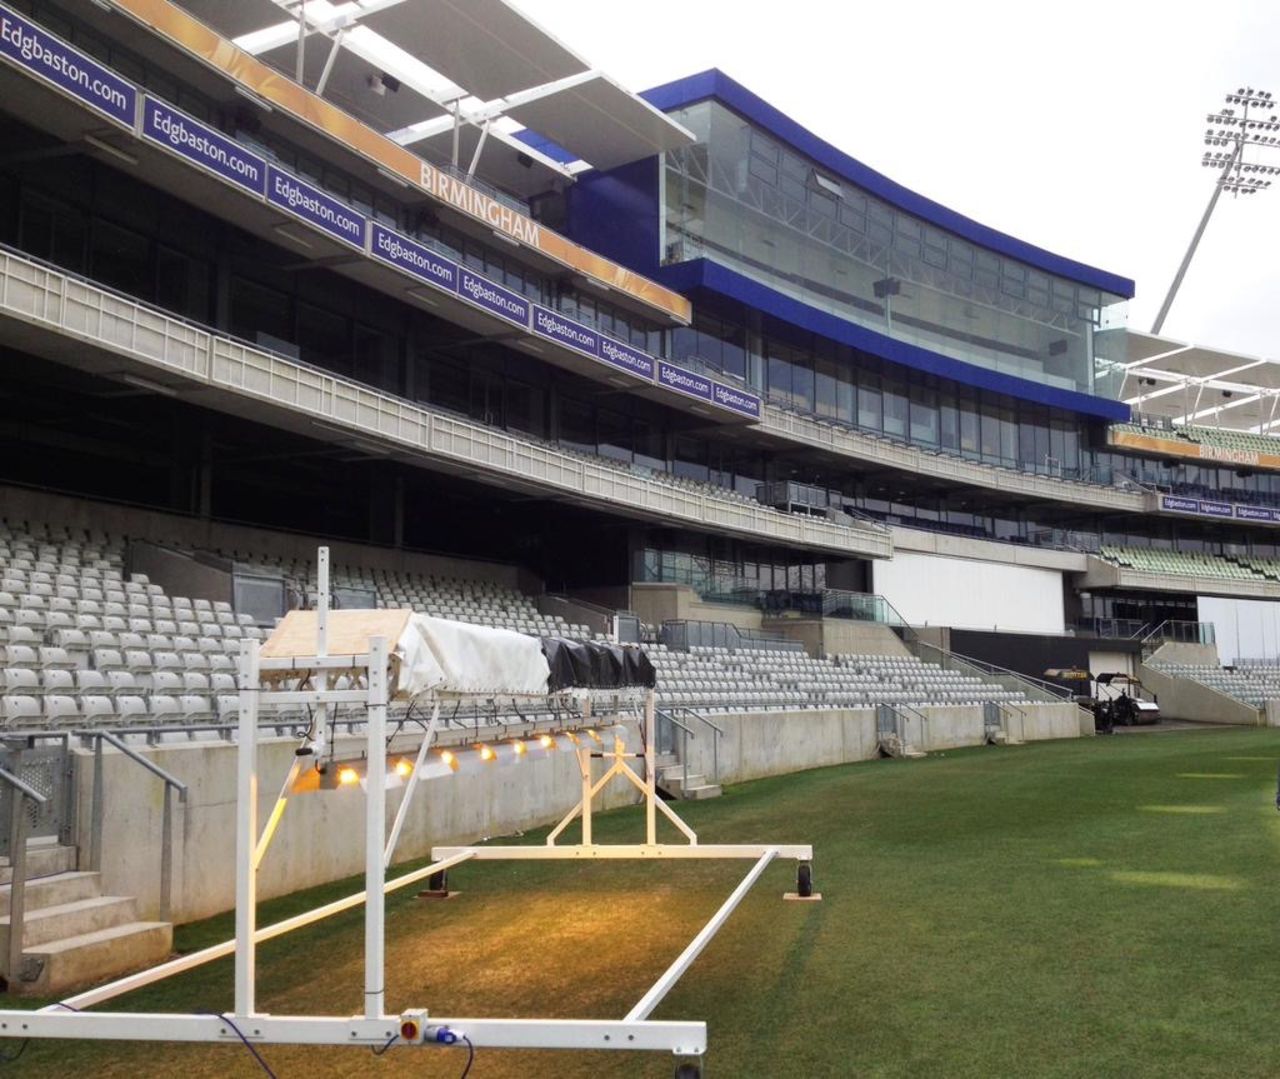 One of the cannabis-growing lamps donated to Warwickshire County Cricket Club (WCCC) by West Midlands Police to help keep soil warm and grow grass on the outfield.